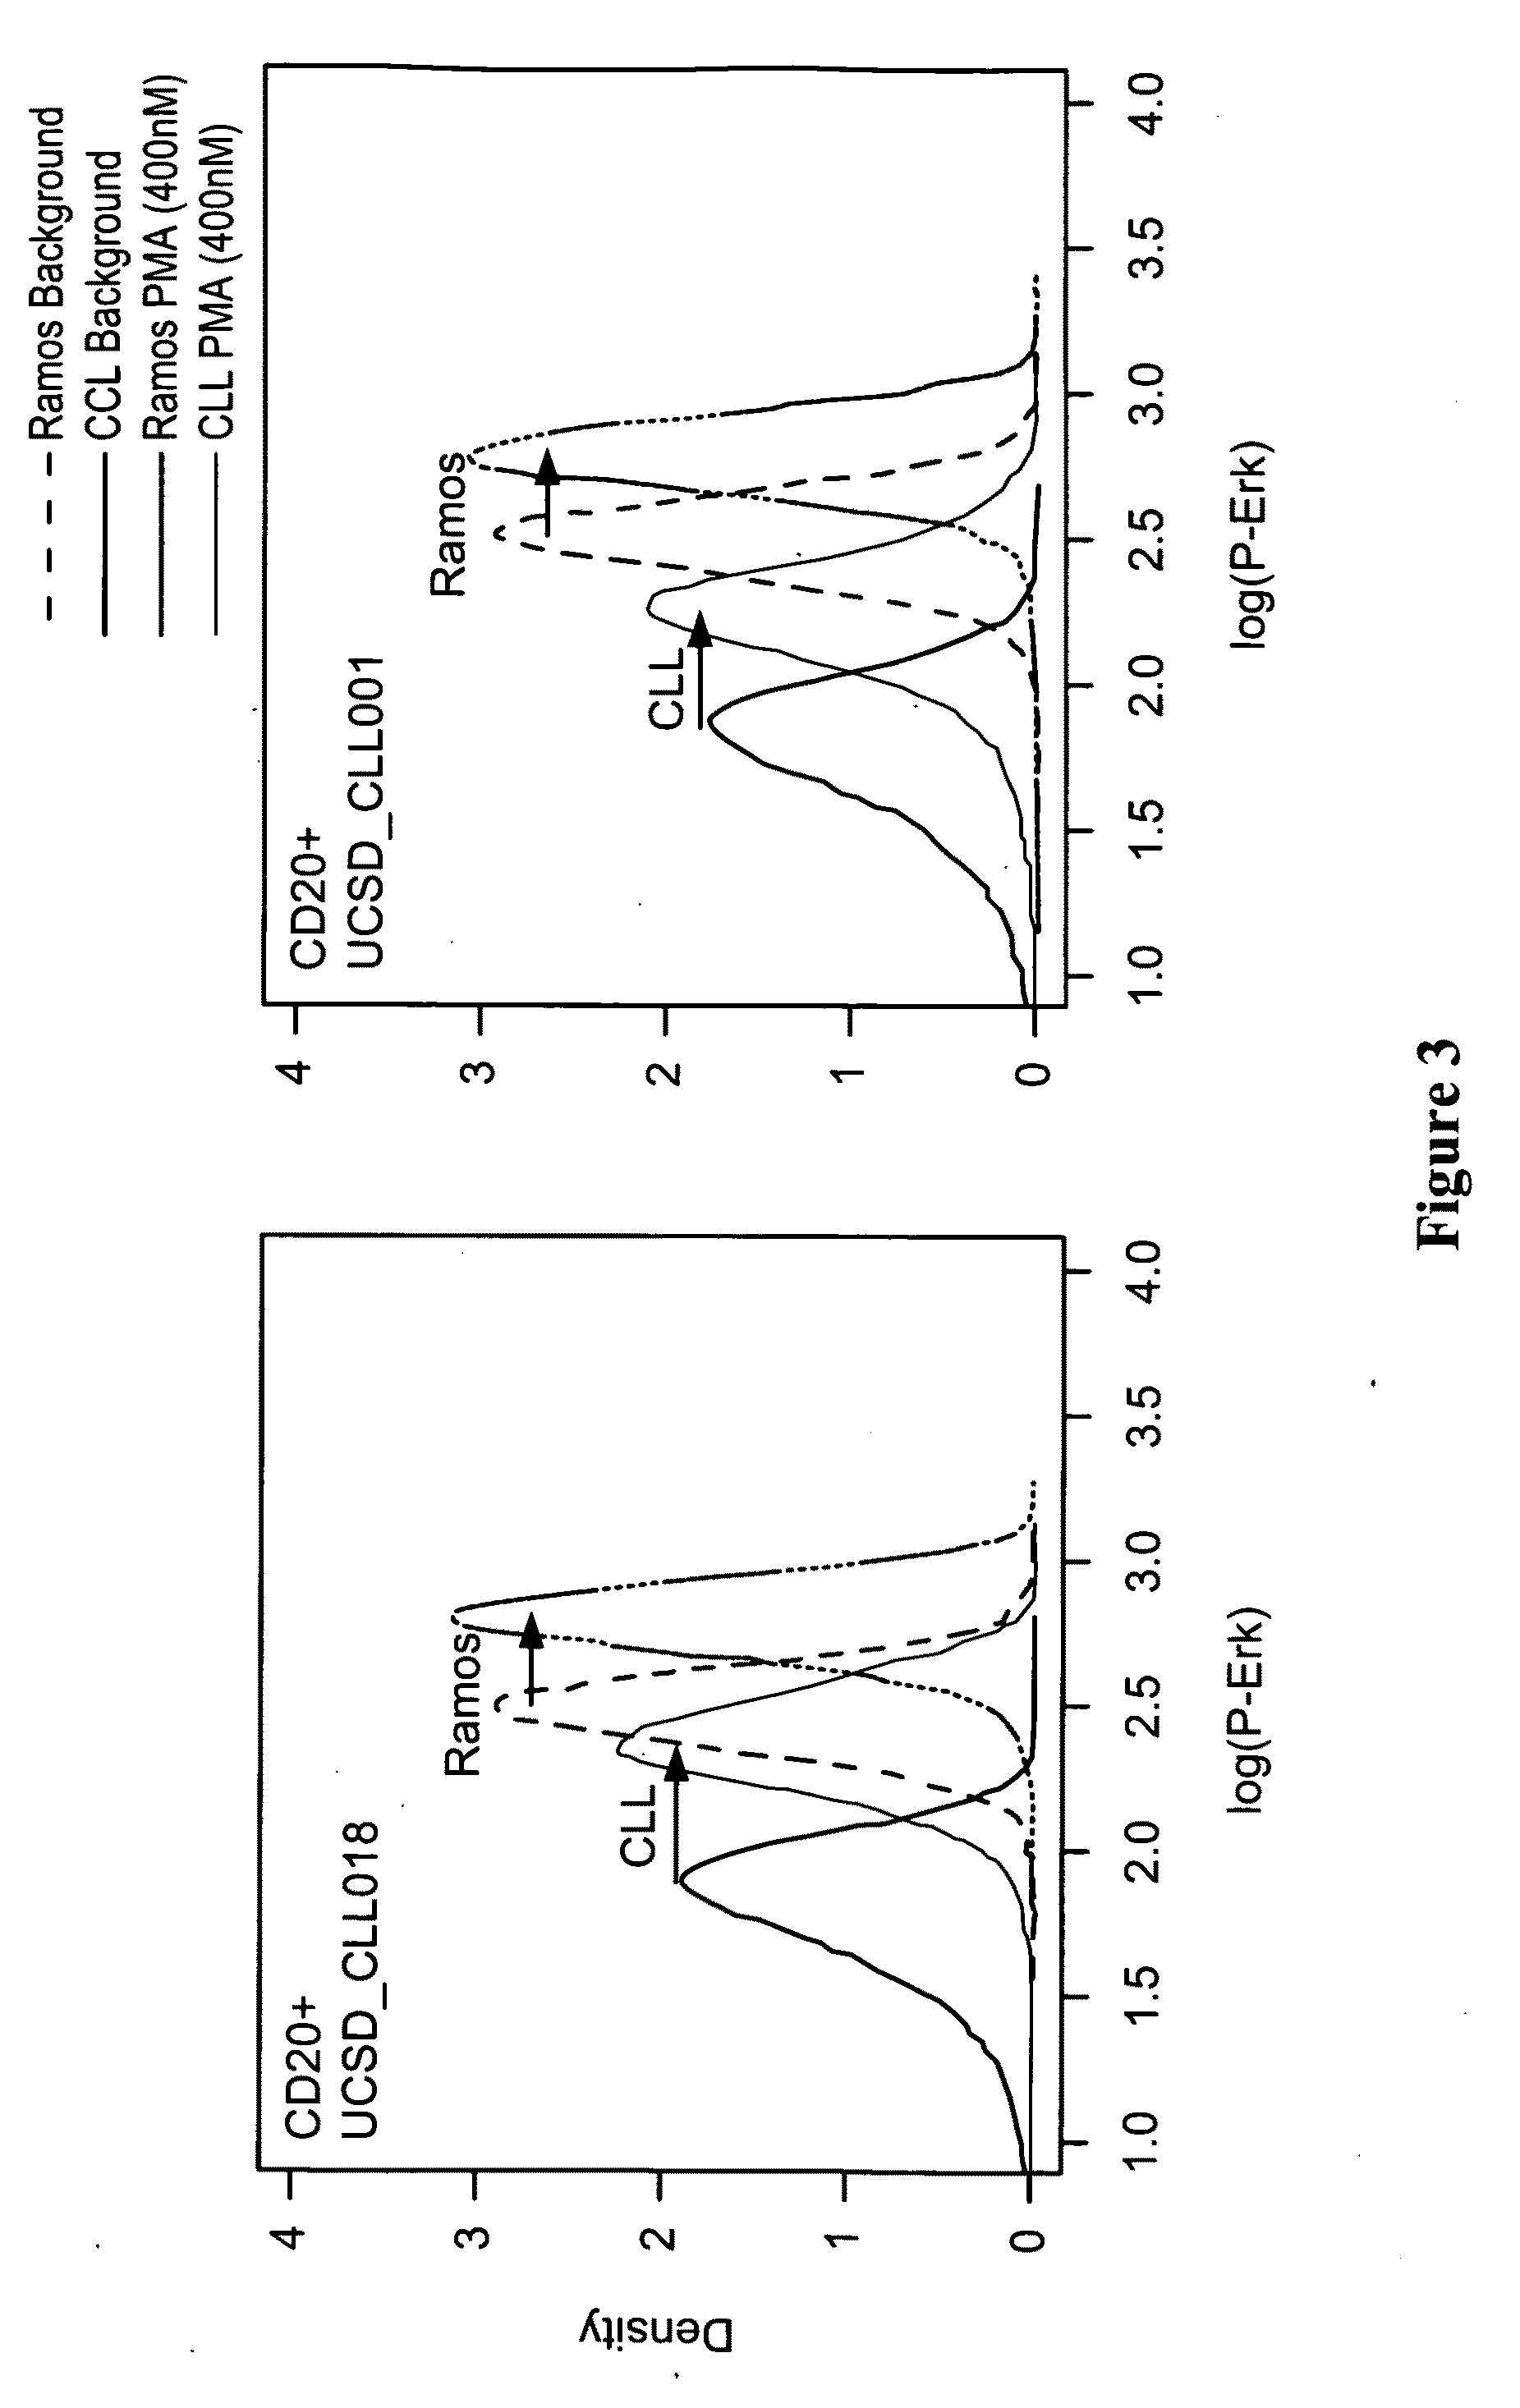 Methods for diagnosis prognosis and methods of treatment